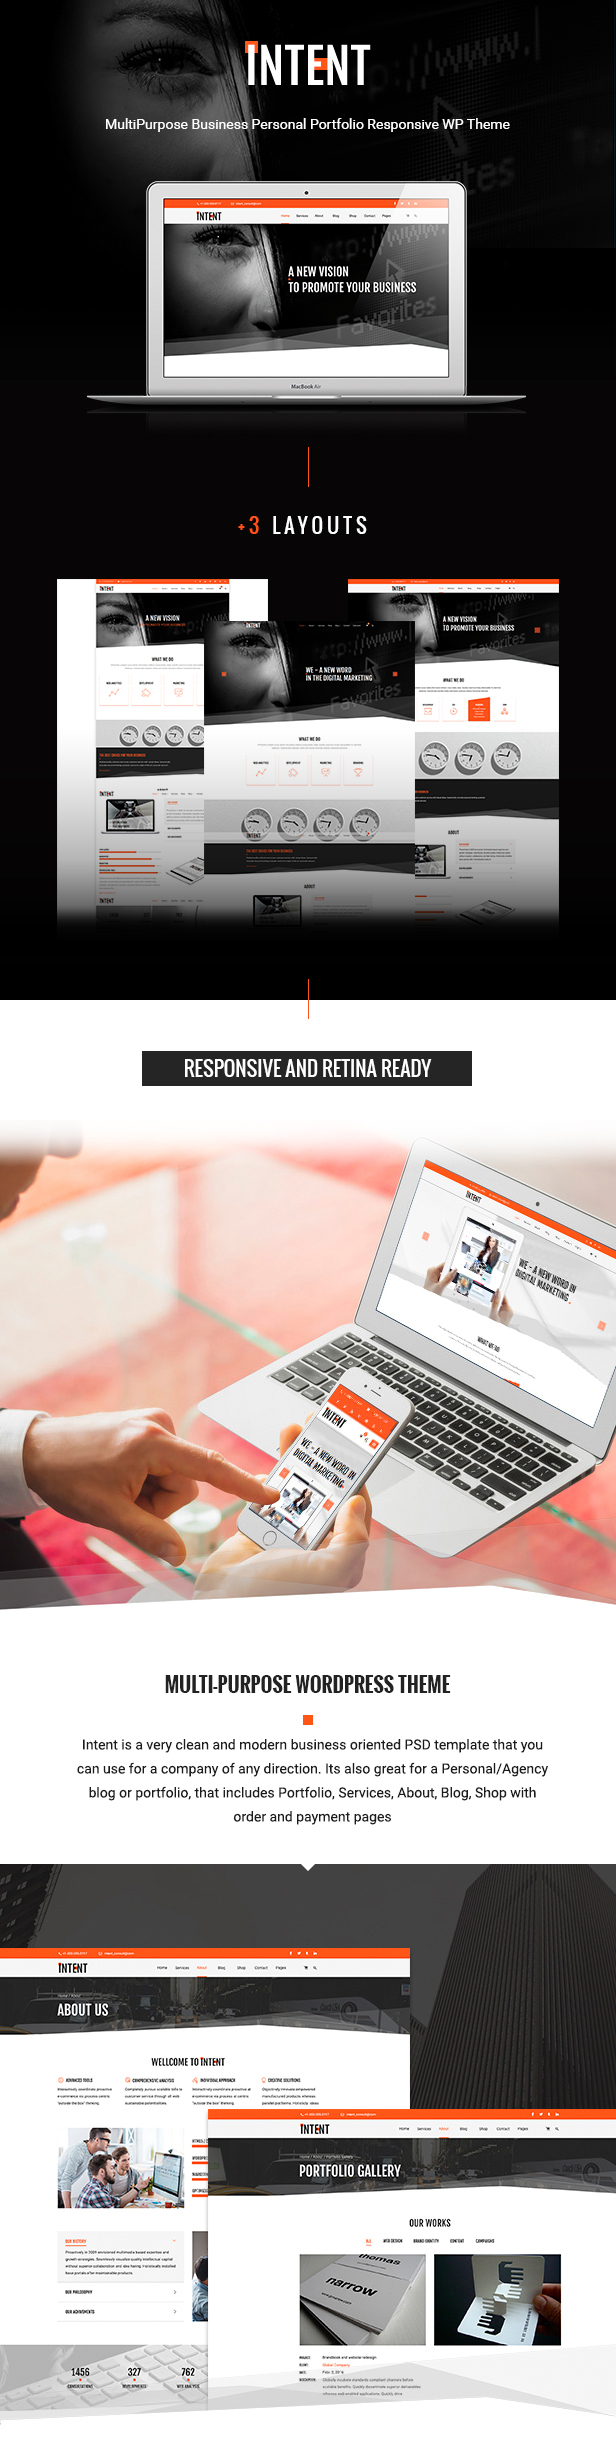 Intent Business Theme